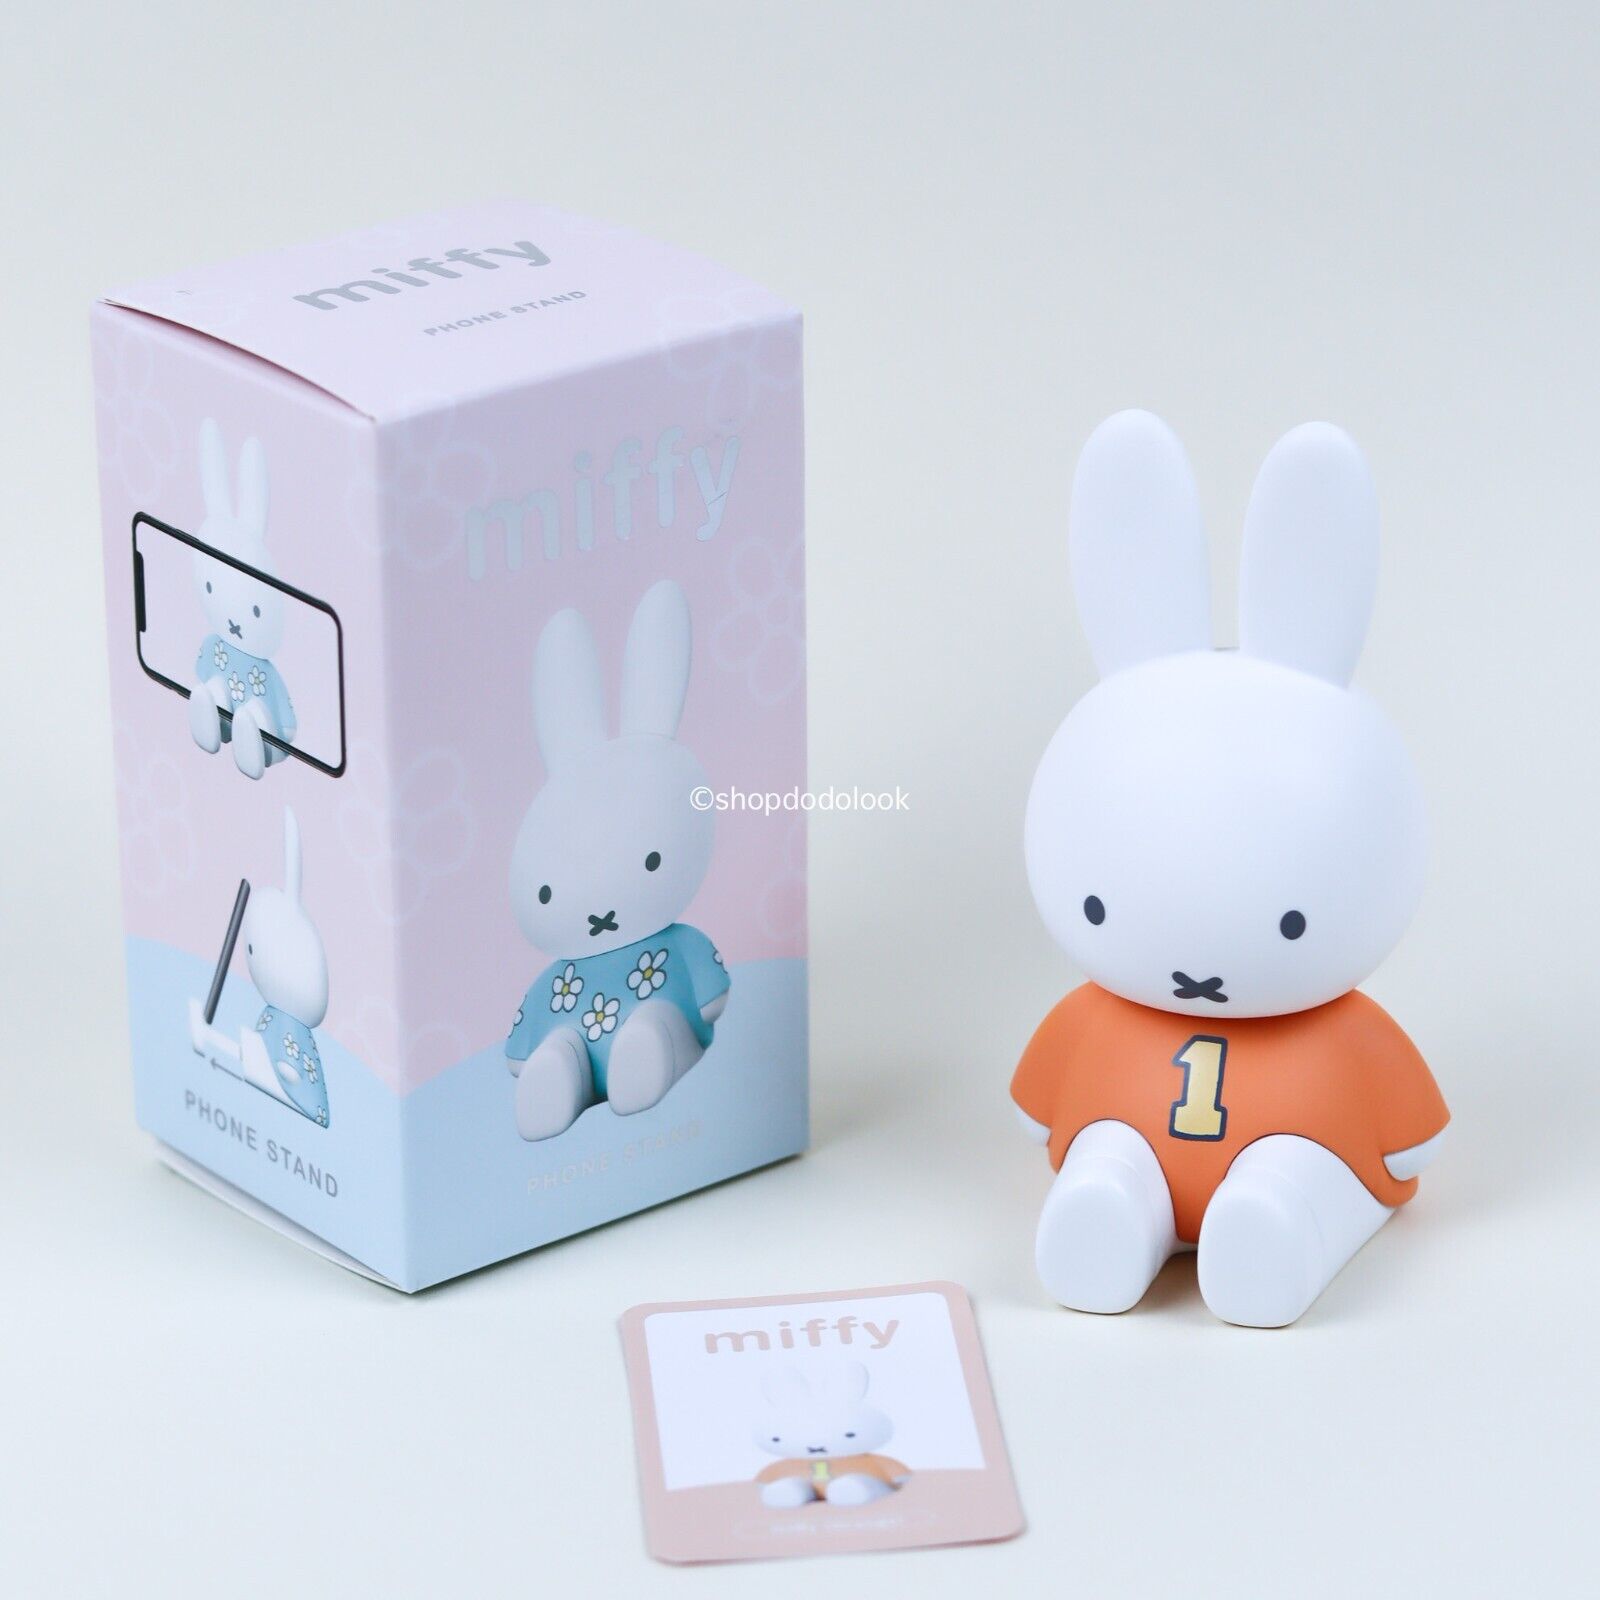 Mercis BV Dick Bruna Miffy Phone Stand Blind Box Figure Open Confirmed